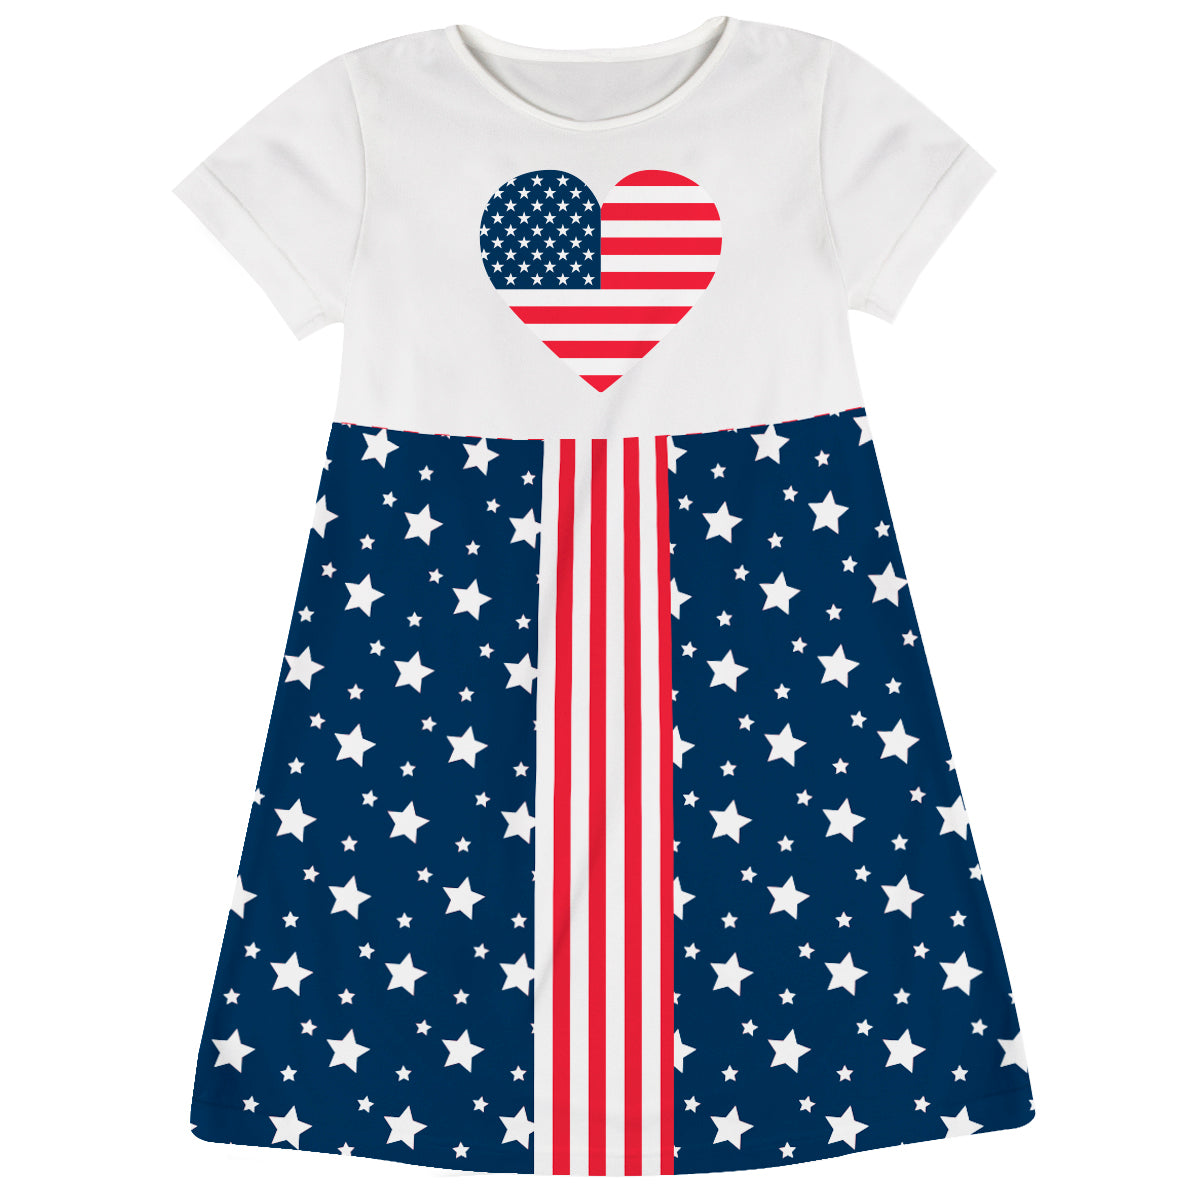 American Heart Stars Print White Navy and Red Stripes Short Sleeve A Line Dress